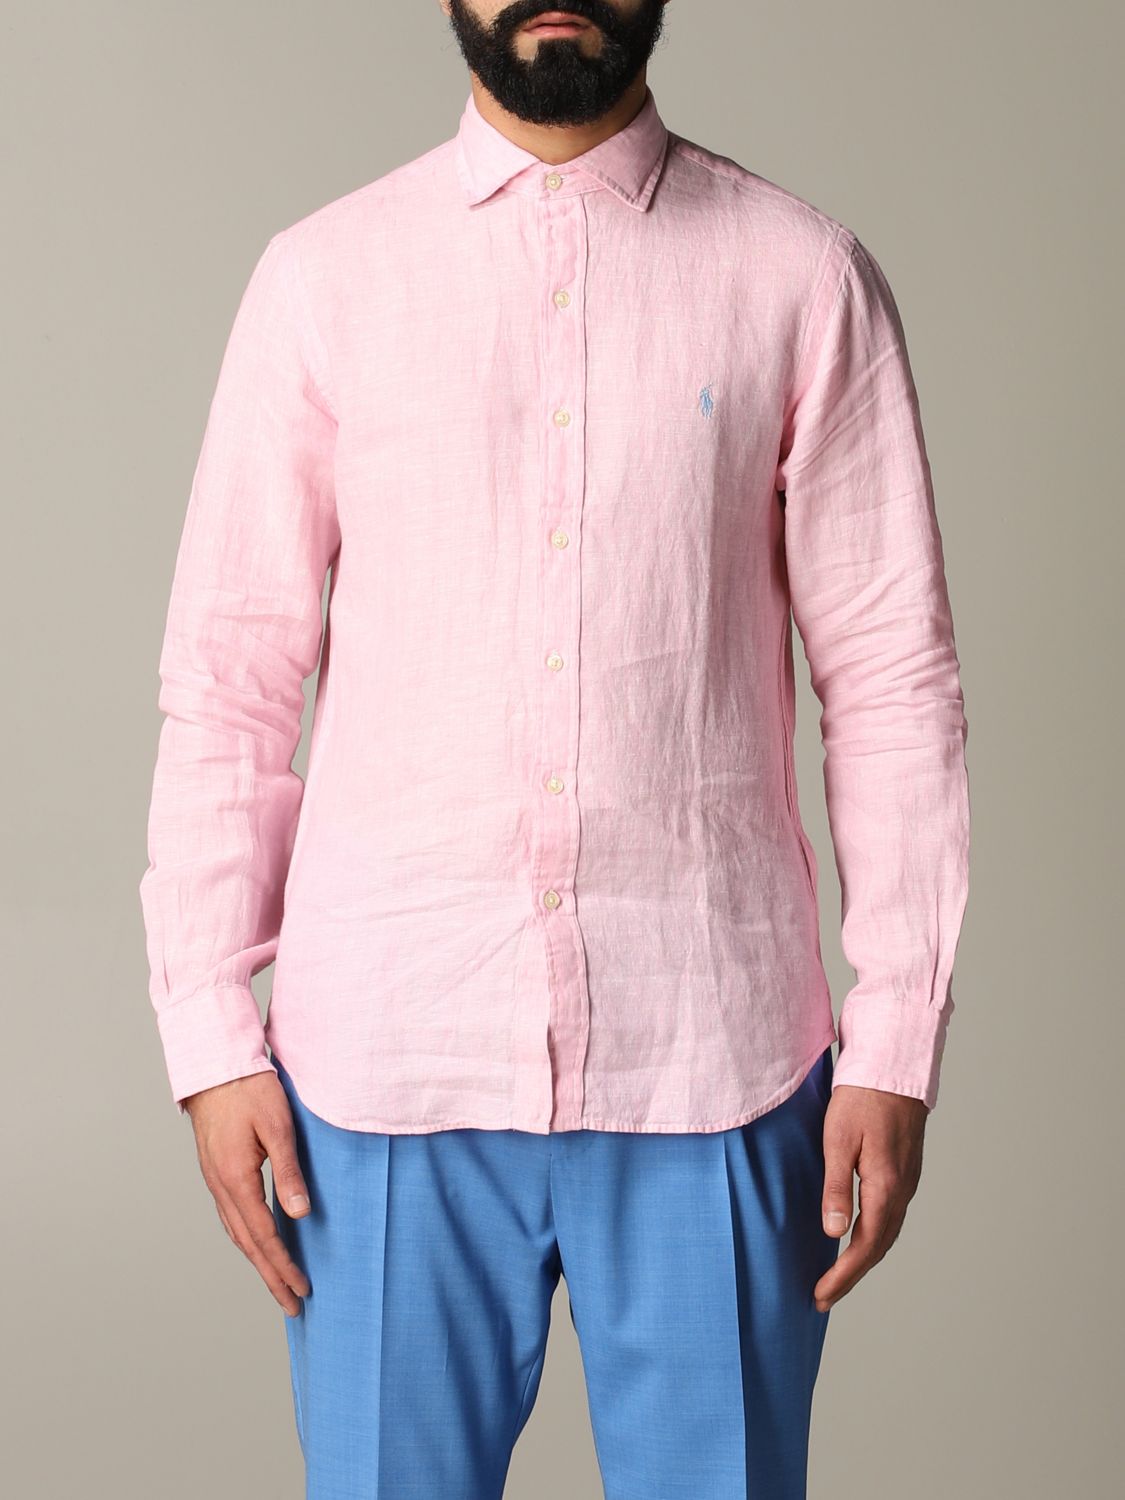 Shirt Polo Ralph Lauren: Polo Ralph Lauren shirt for man pink 1